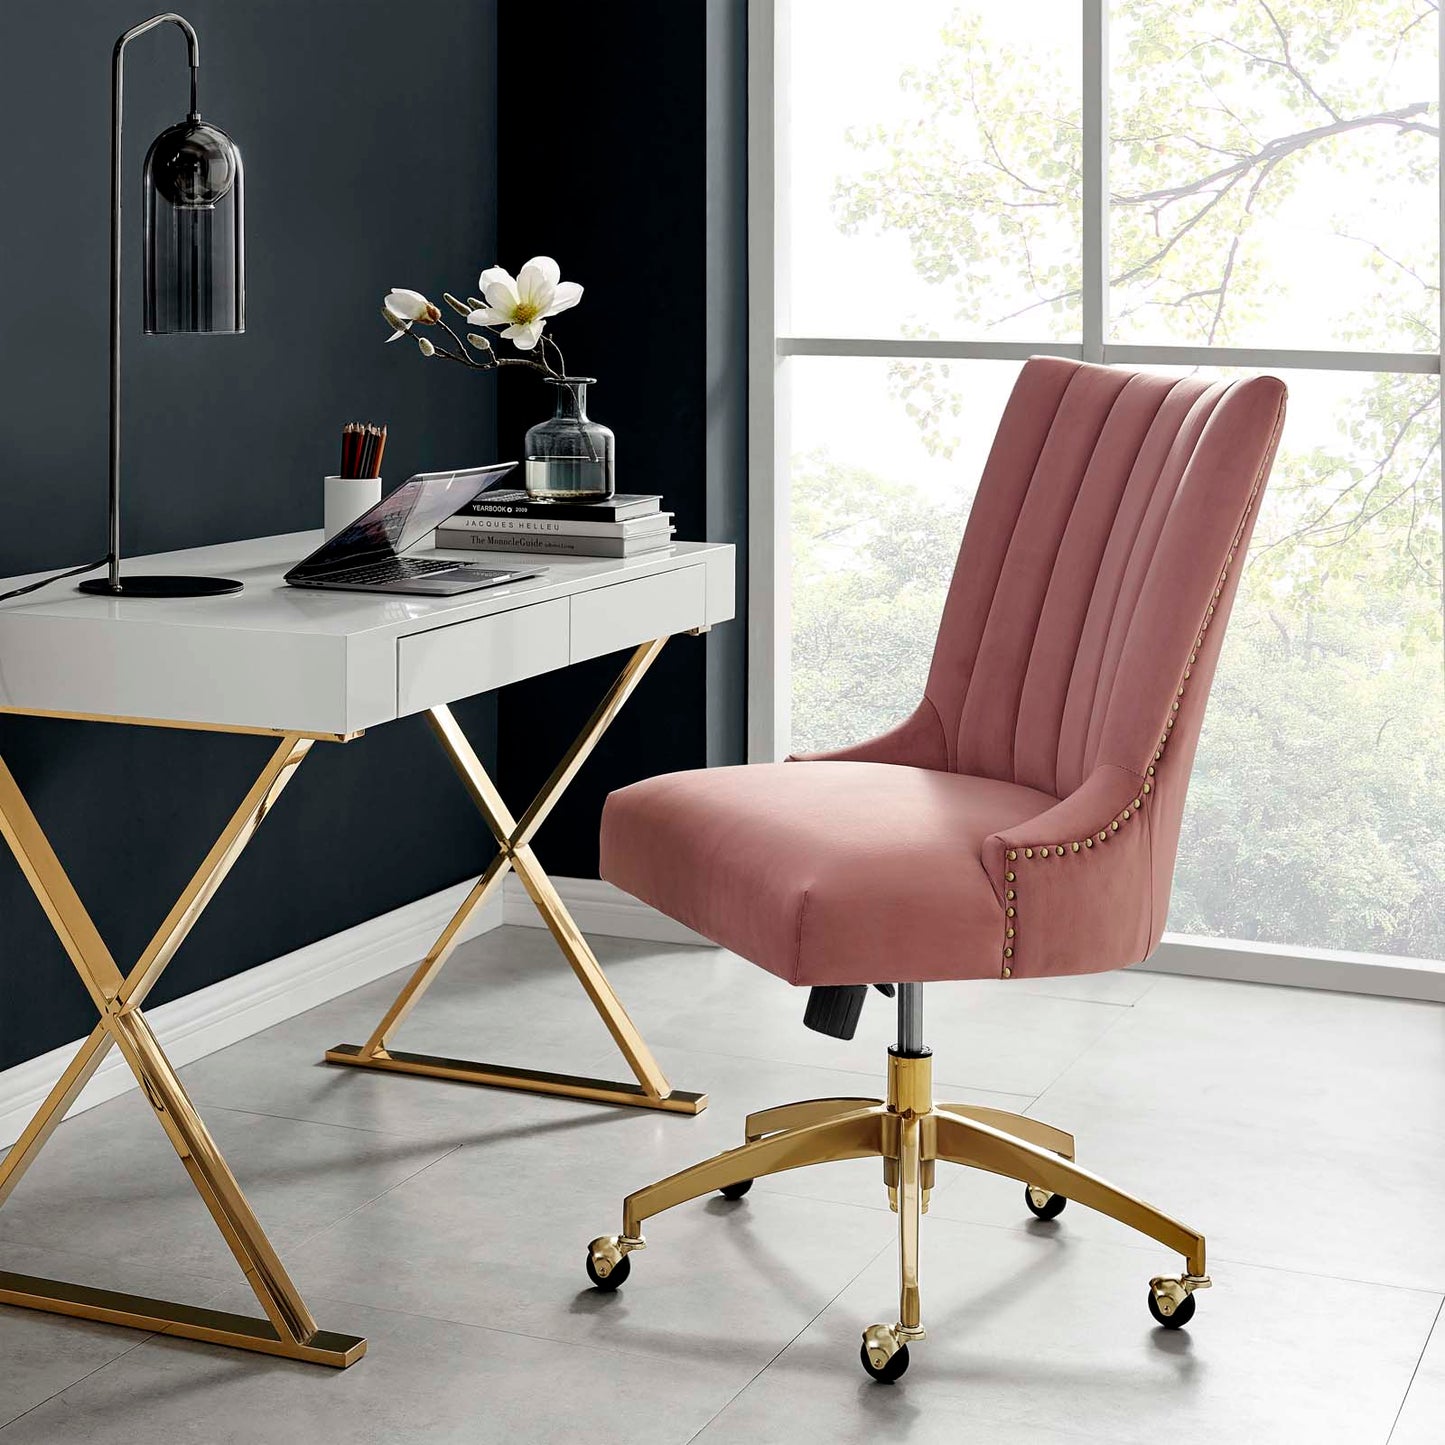 Empower Channel Tufted Performance Velvet Office Chair Gold Dusty Rose EEI-4575-GLD-DUS